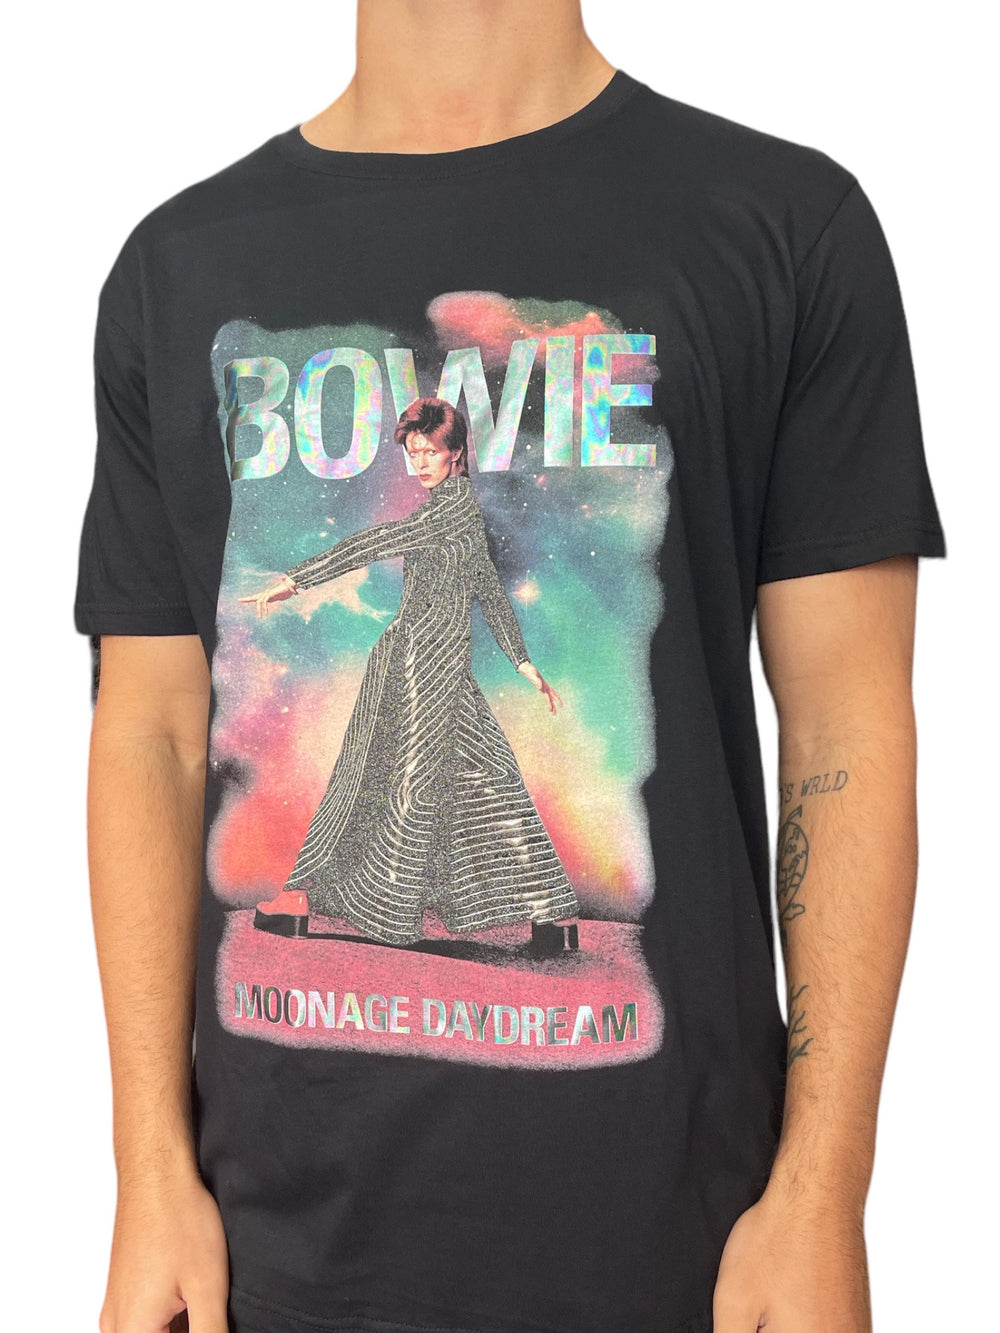 David Bowie FOIL / SPARKLE SPECIAL EDITION Moonage Daydream Official Unisex T Shirt Brand New Various Sizes